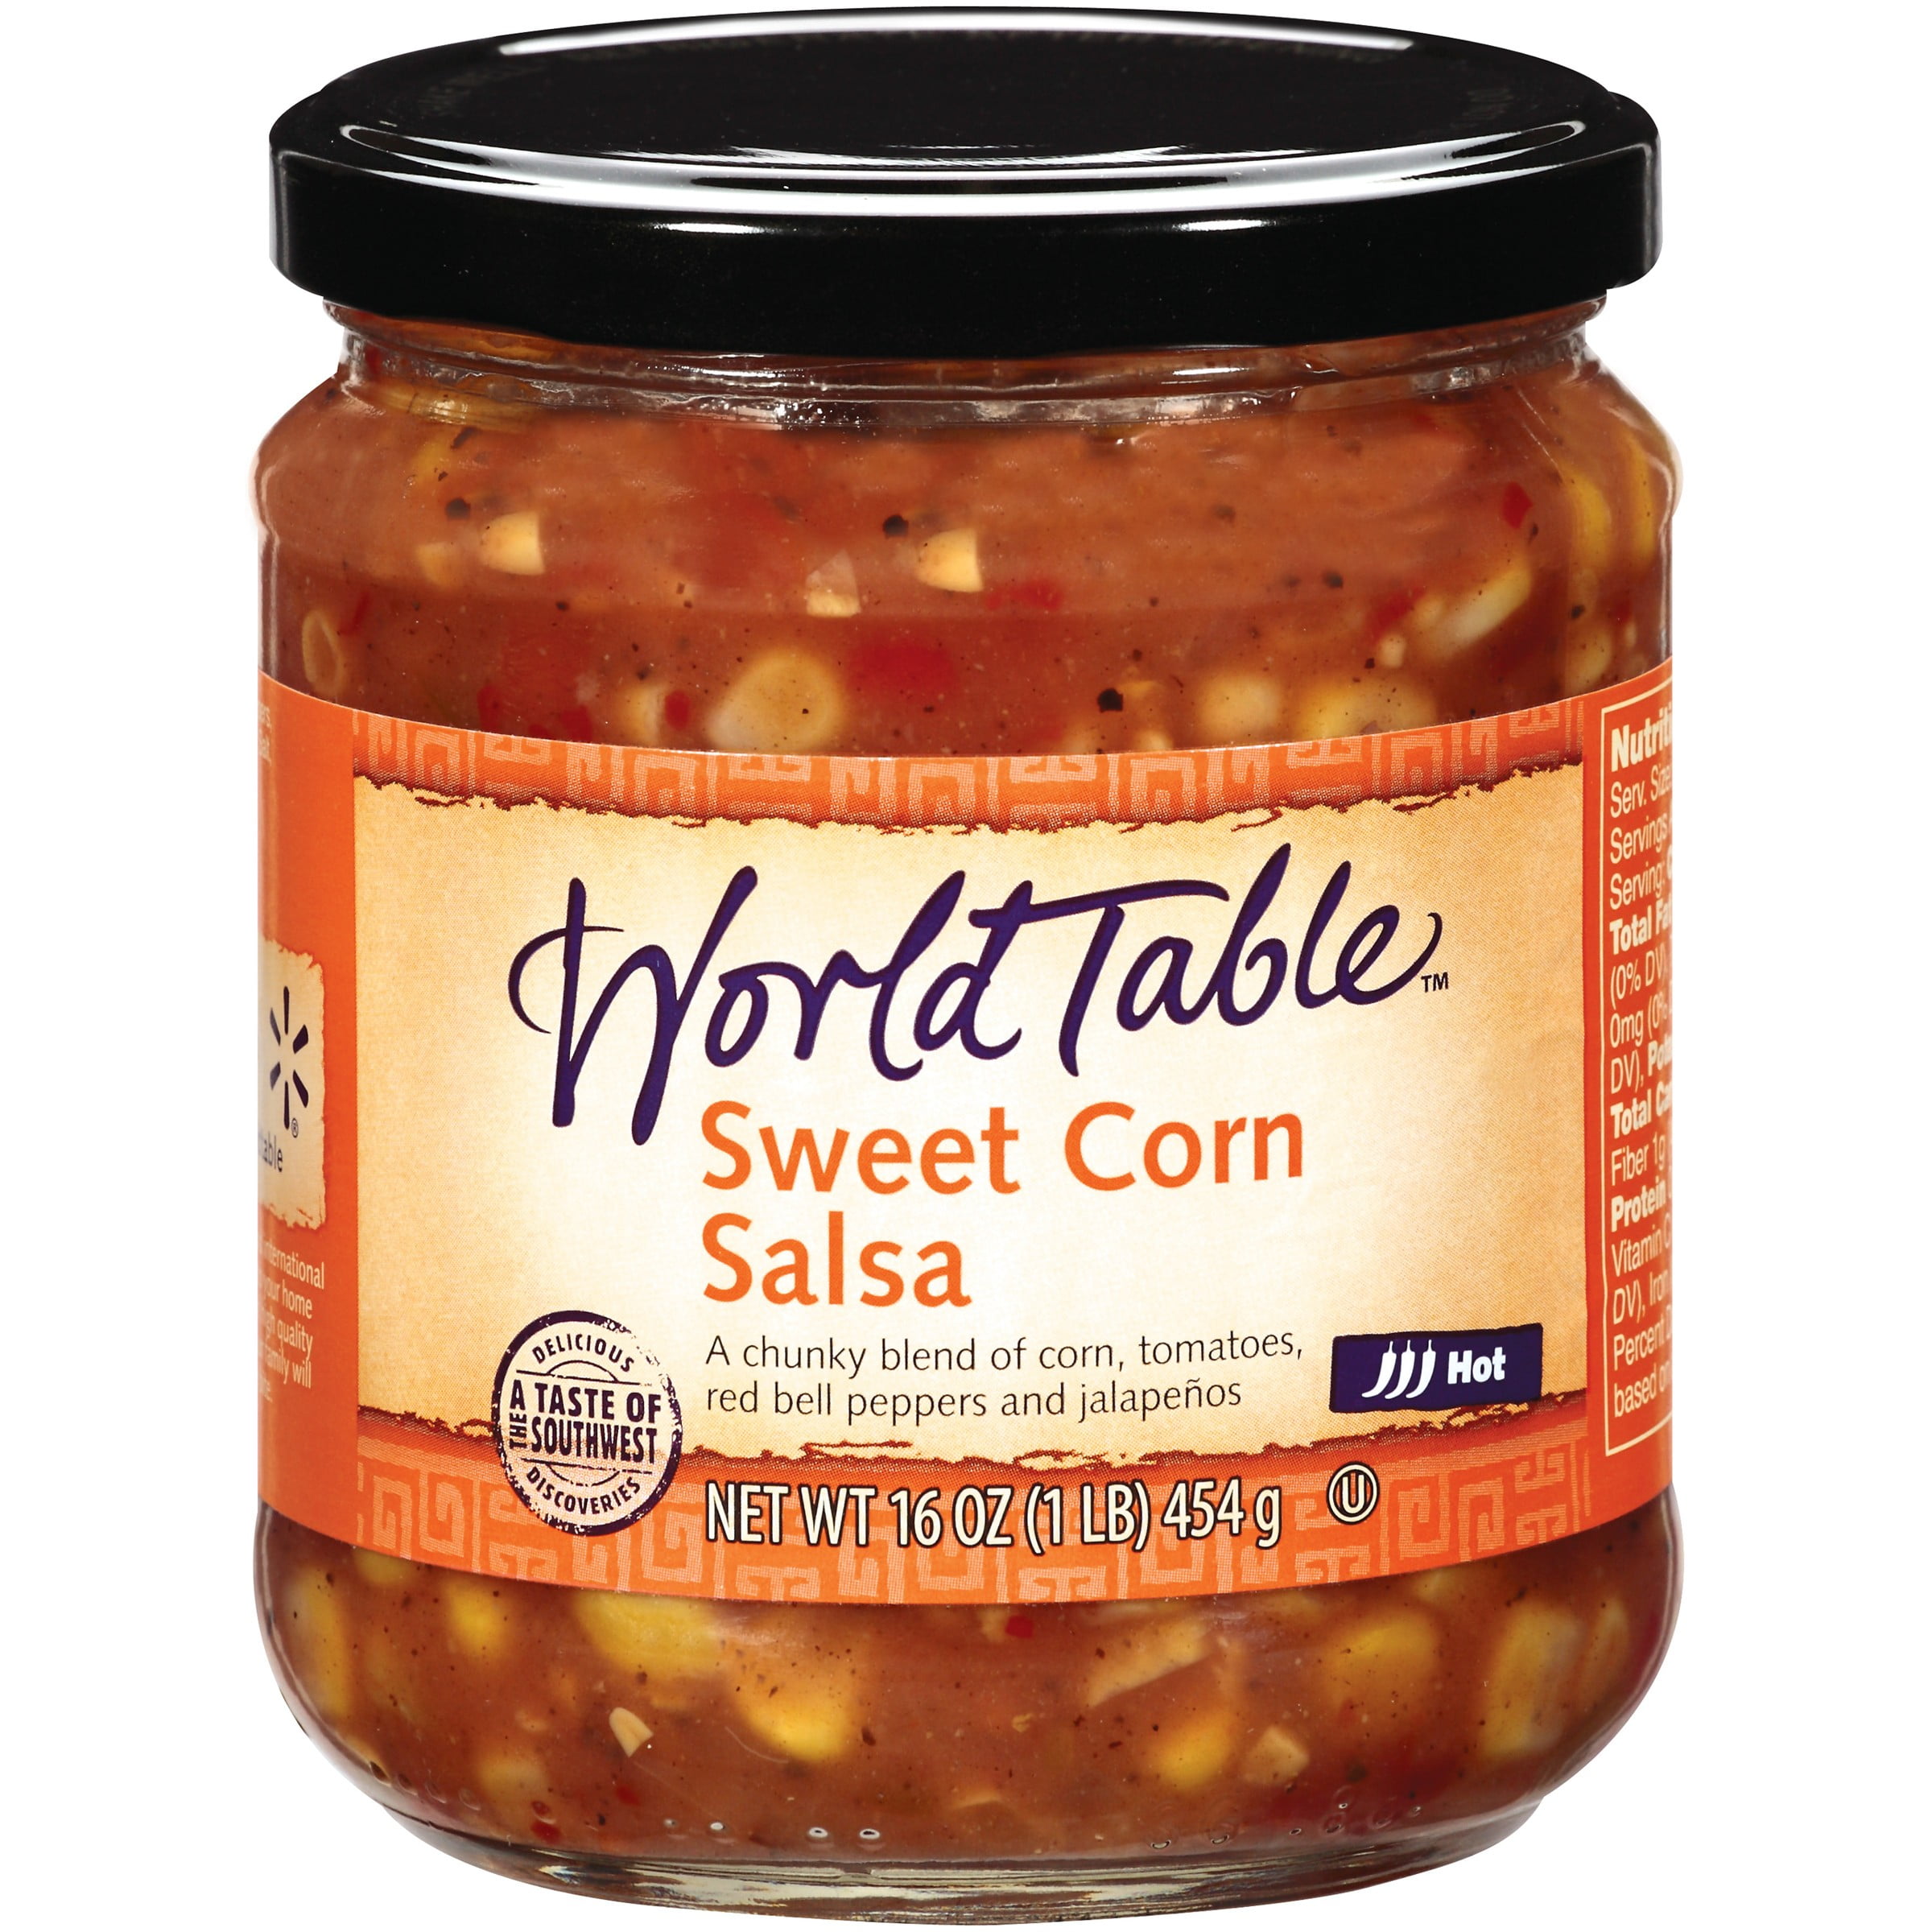 Country Sweets Mild Fine Chopped Salsa 16 oz Jar – Country Sweets Honey